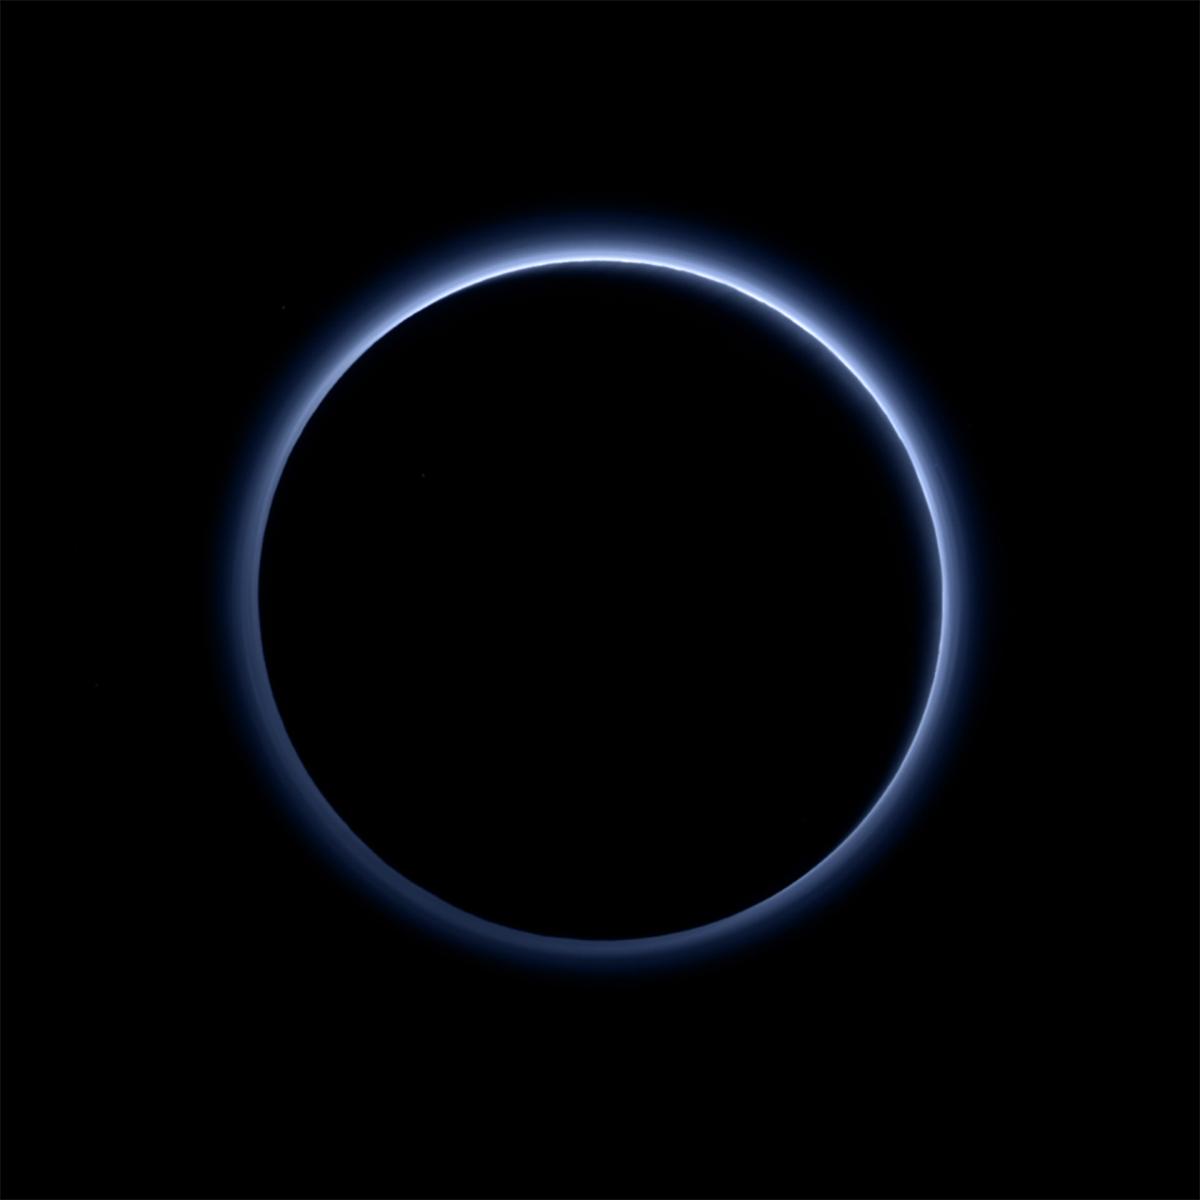 Blue ring of light surrounding a pitch black Pluto